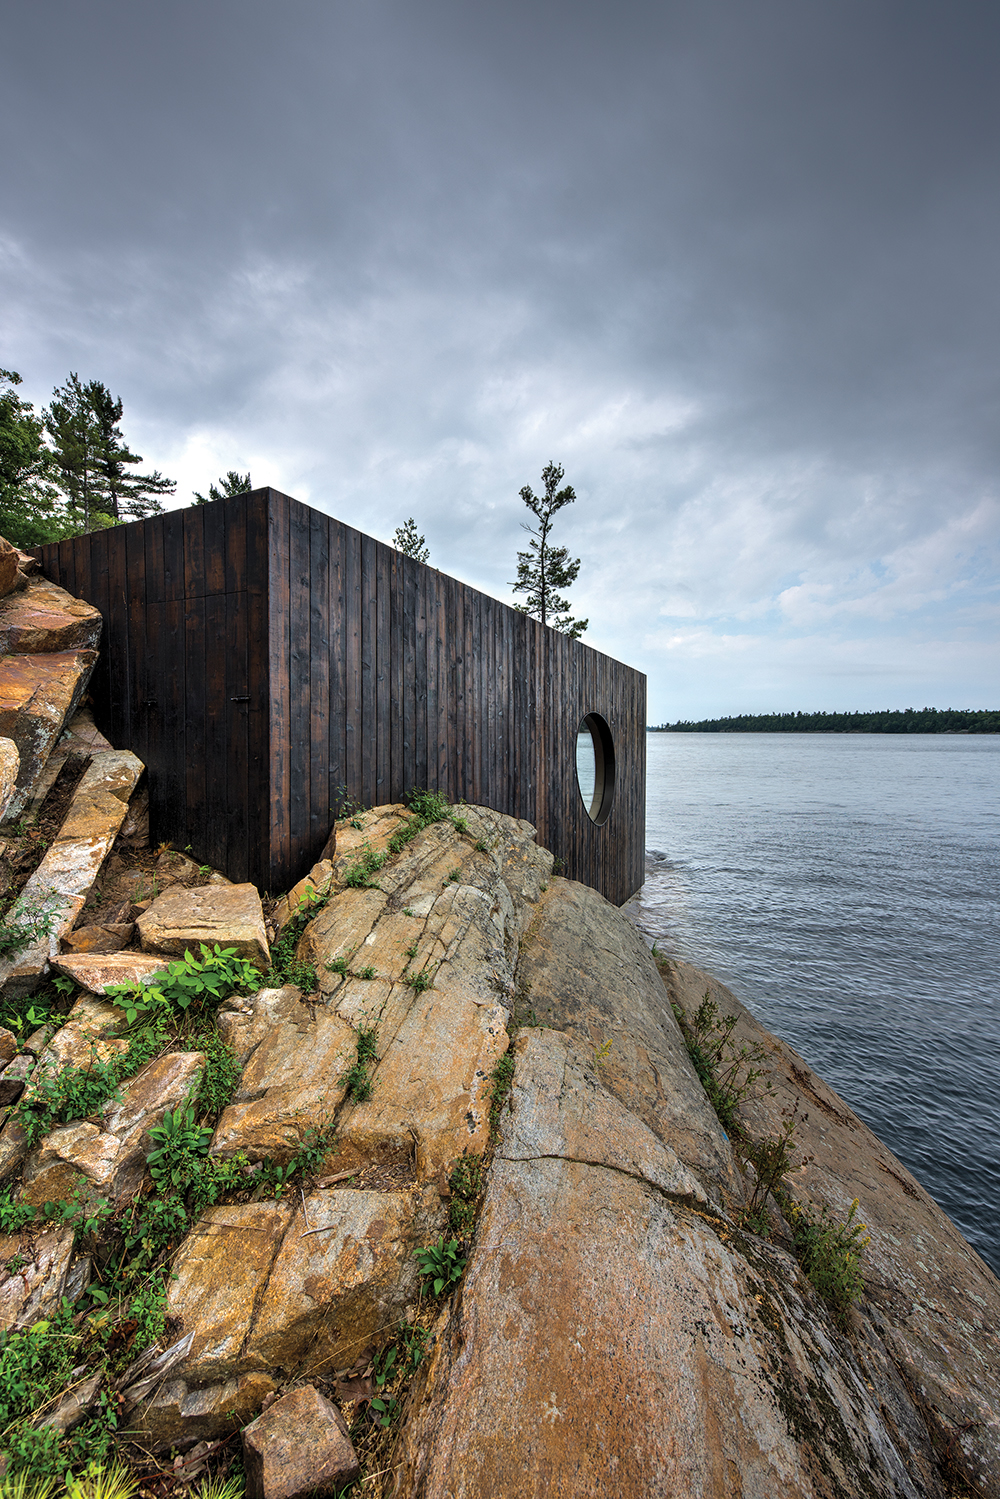 A cold plunge following a sauna is generally recommended. This beautiful architectural sauna rests just above Georgian Bay for that purpose.